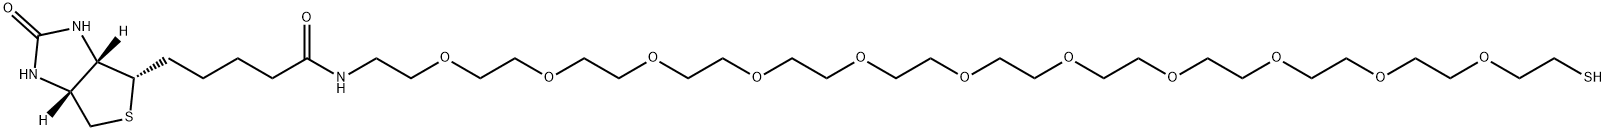 1H-Thieno[3,4-d]imidazole-4-pentanamide, hexahydro-N-(35-mercapto-3,6,9,12,15,18,21,24,27,30,33-undecaoxapentatriacont-1-yl)-2-oxo-, (3aS,4S,6aR)- Structure